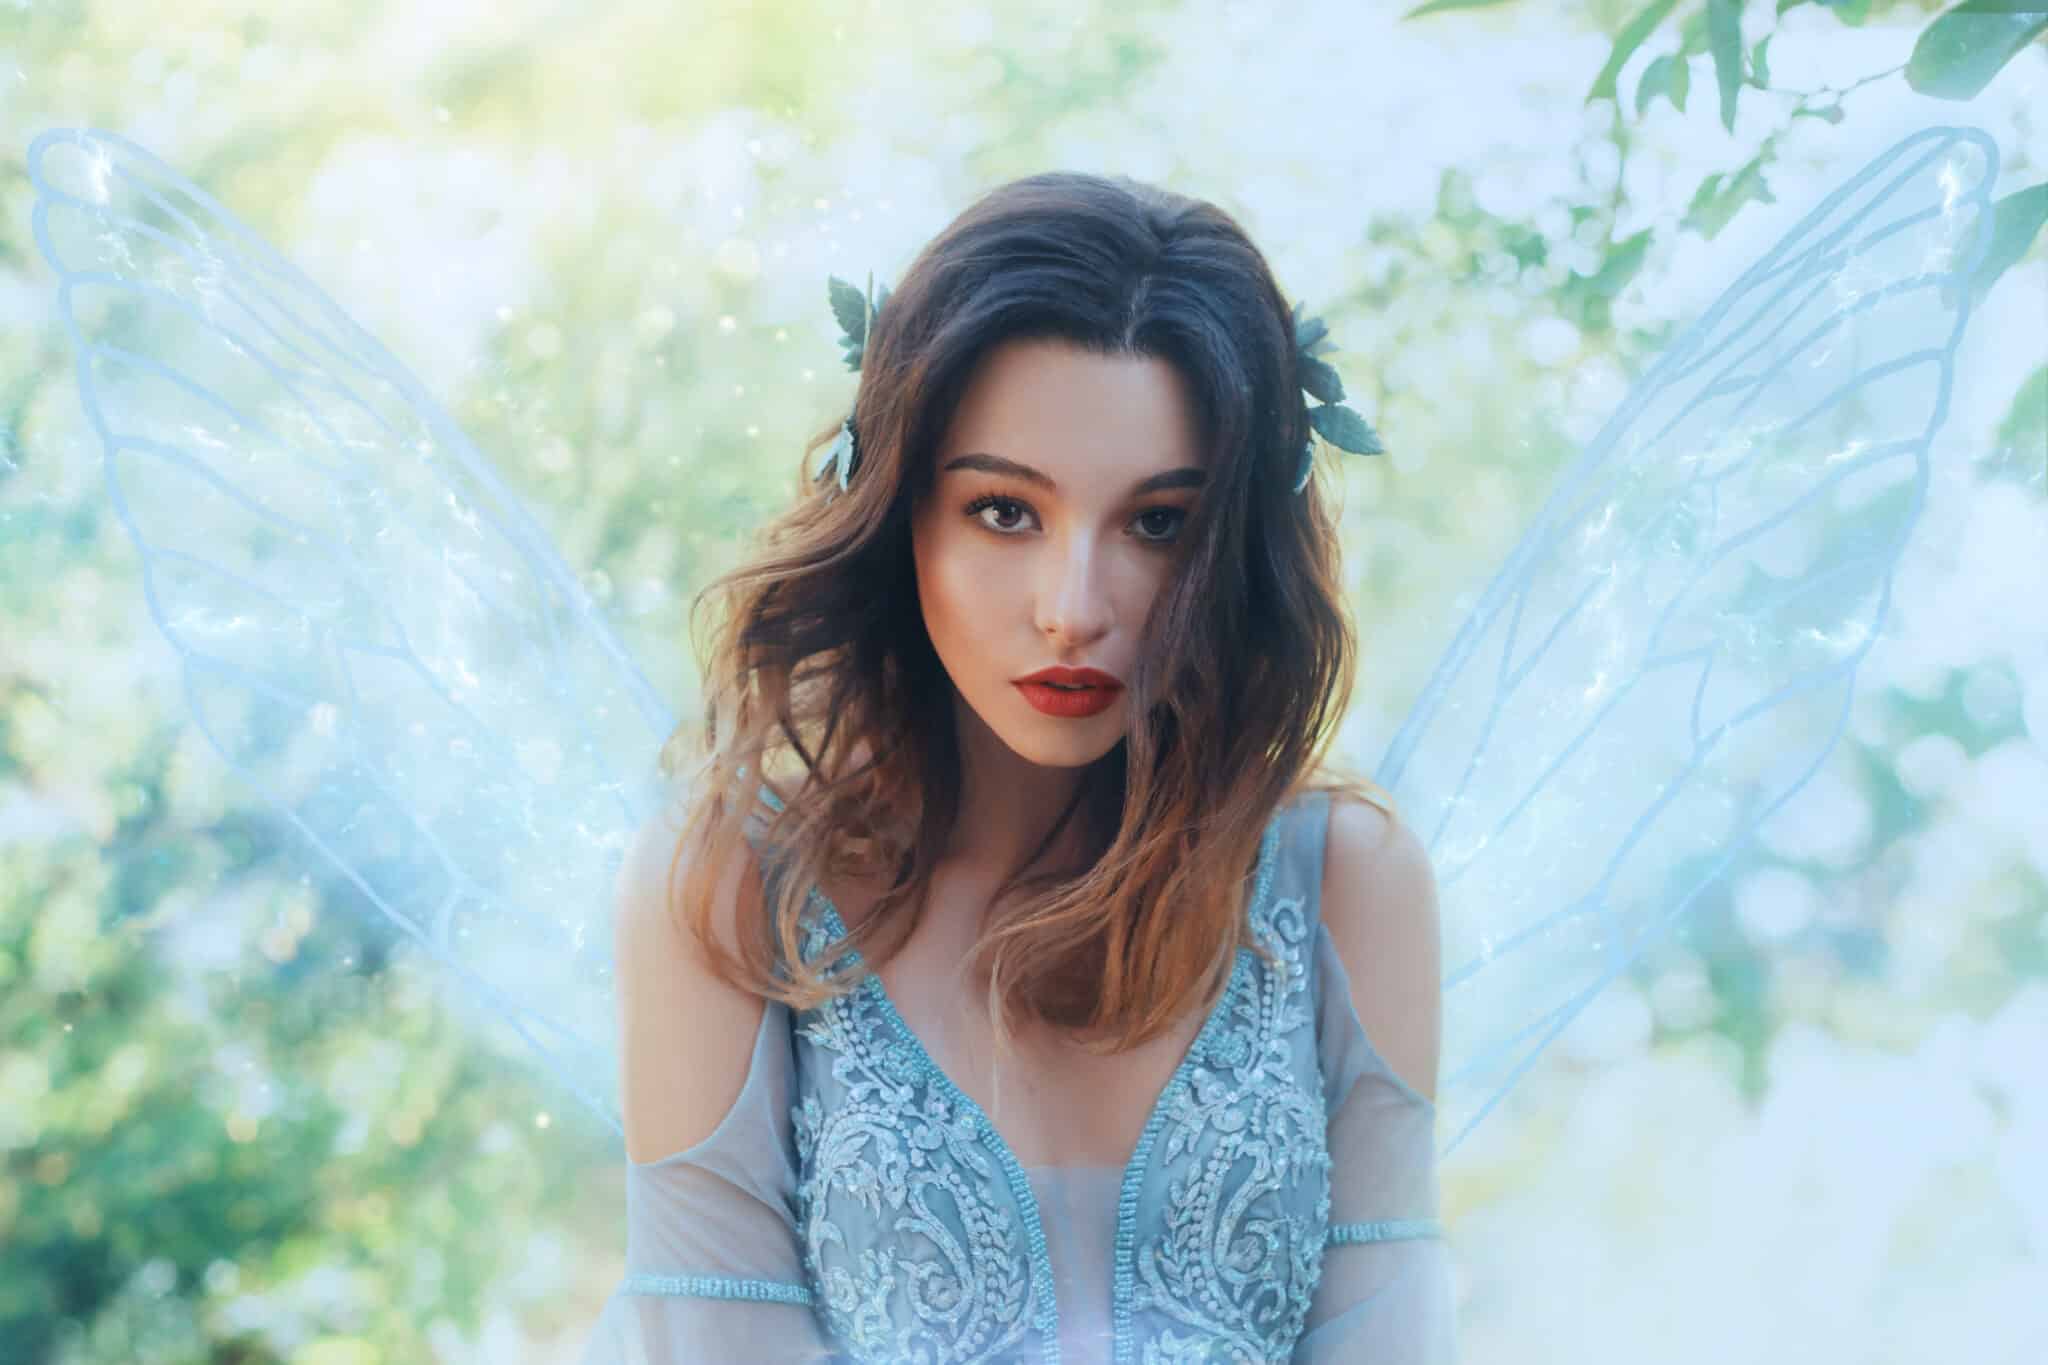 Fantasy closeup portrait attractive woman in image young fairy. carnival Costume blue dress transparent wings. 